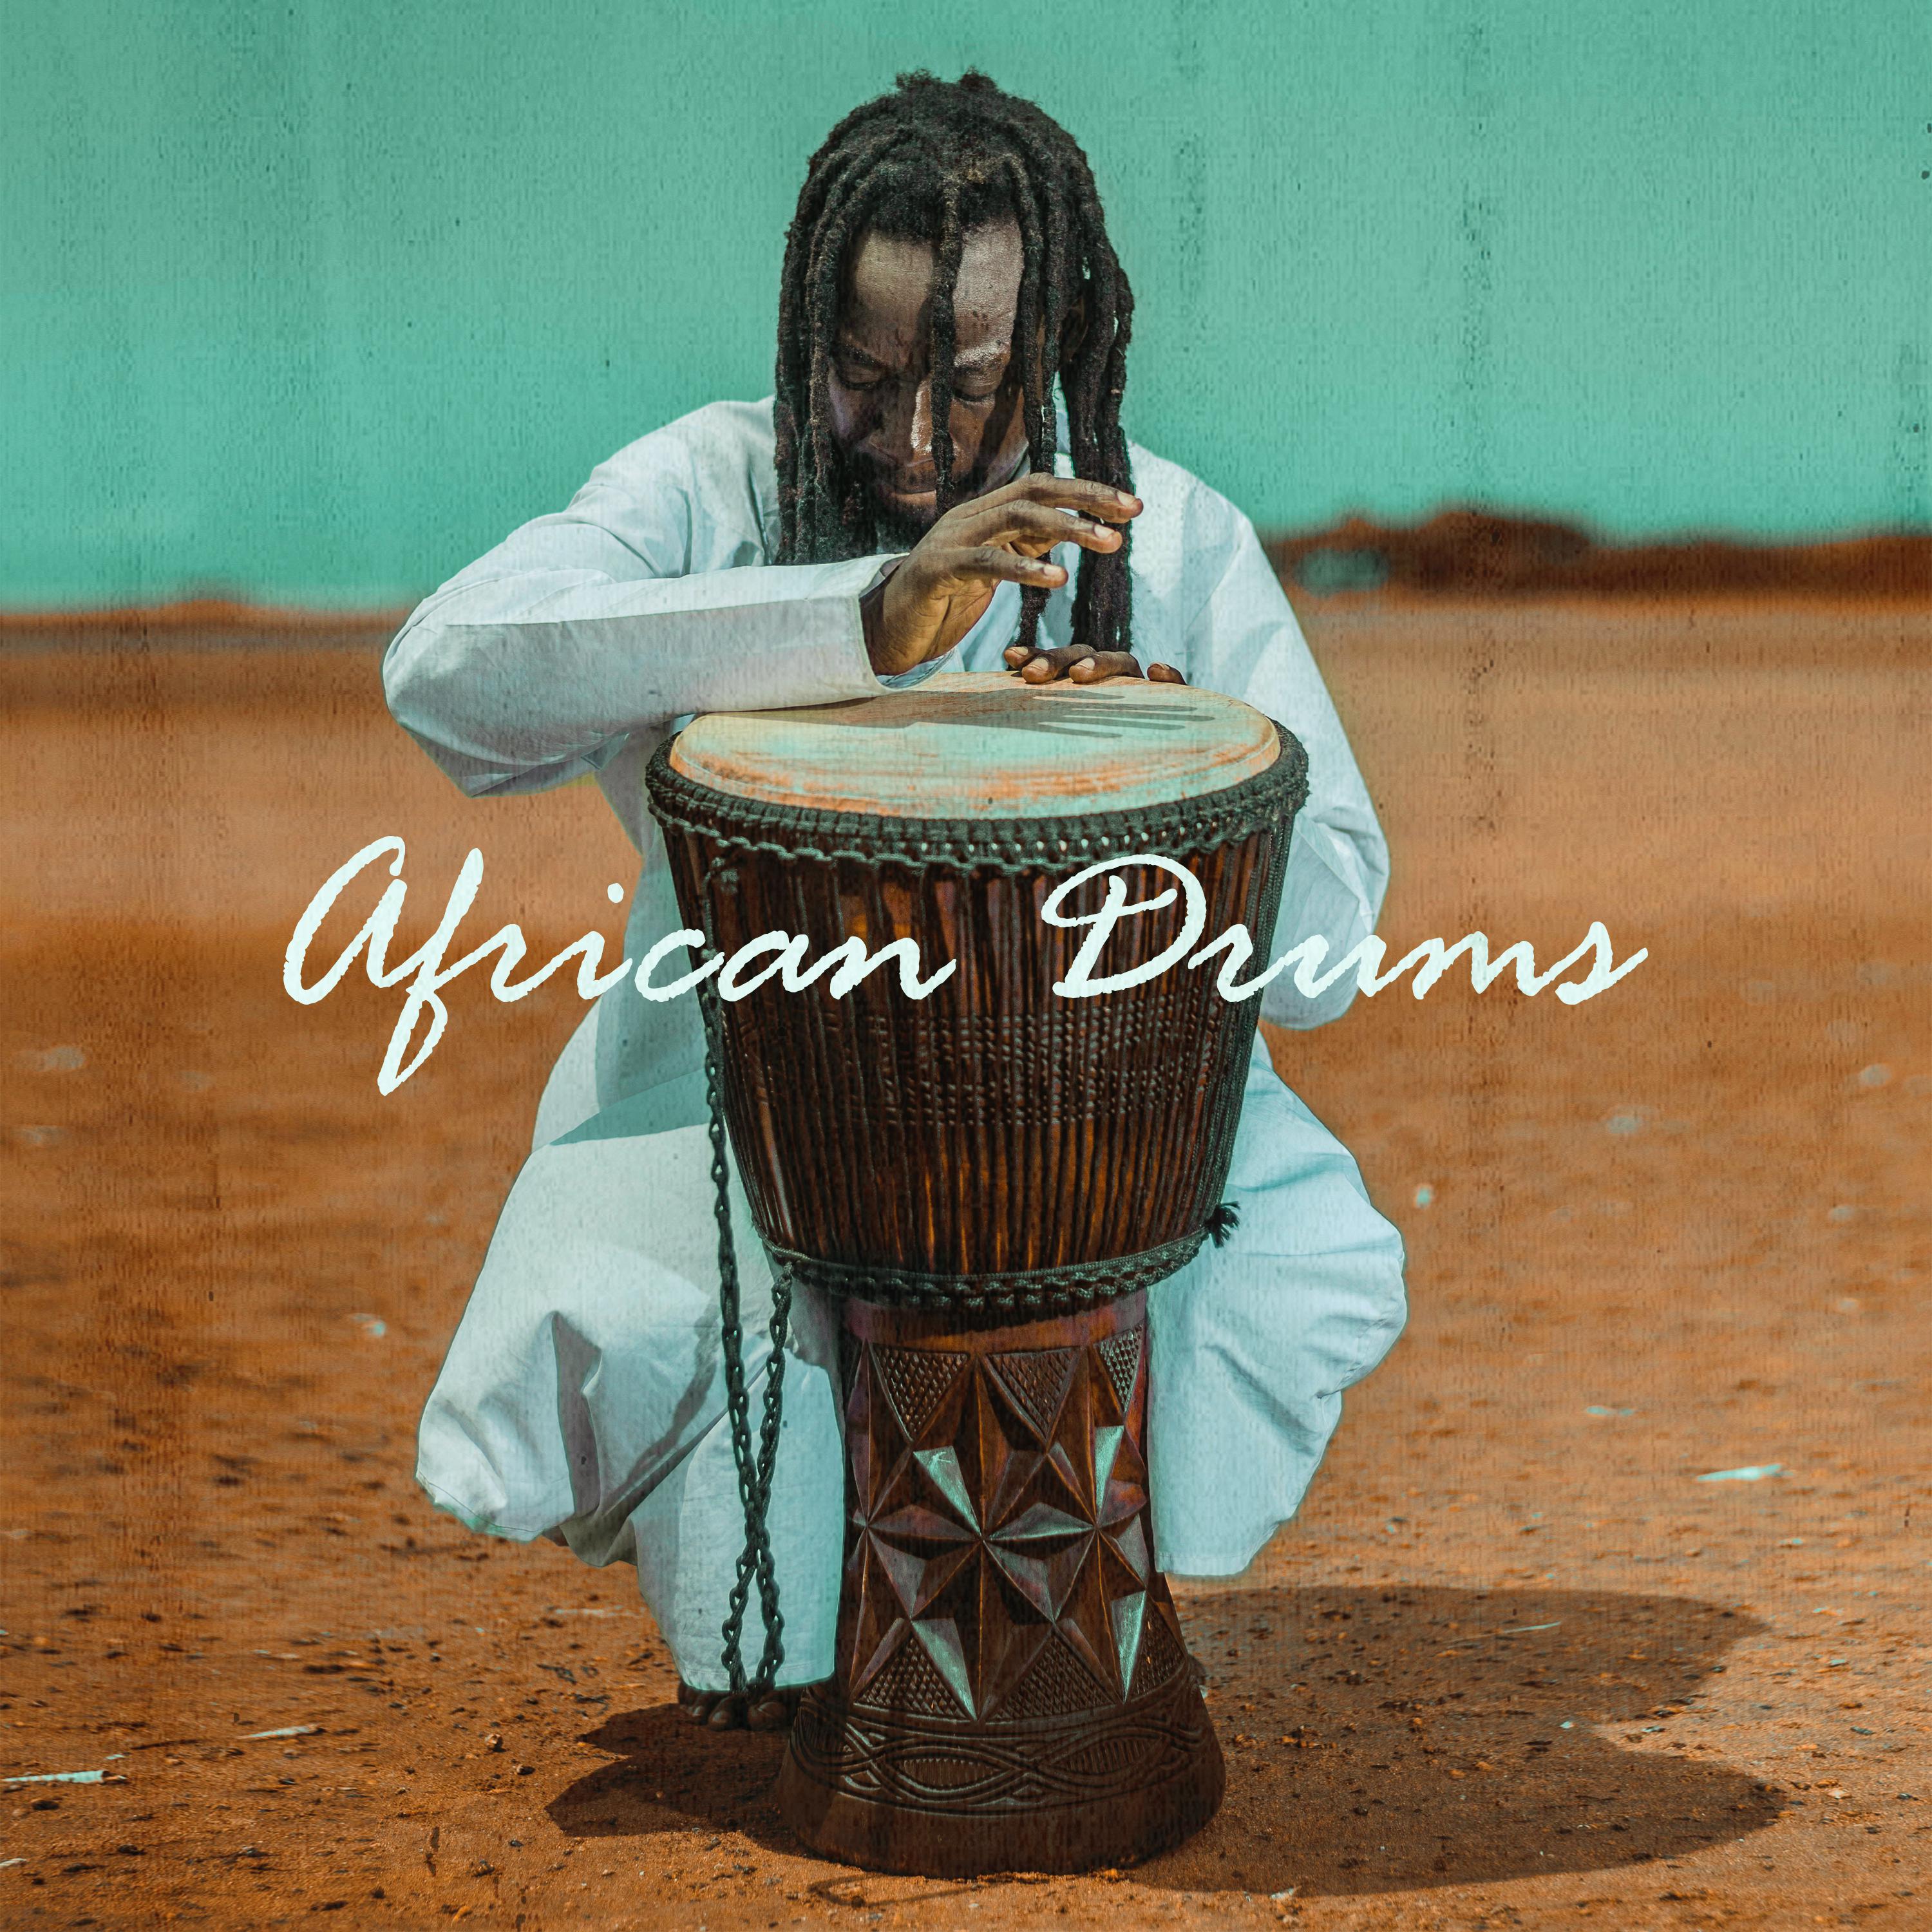 African Drums (Sacred Chants, Ethnic Dreams, Meditation Shamanic Music, Emotional Atmosphere, Pure Karma, Rituals, Music Journey)